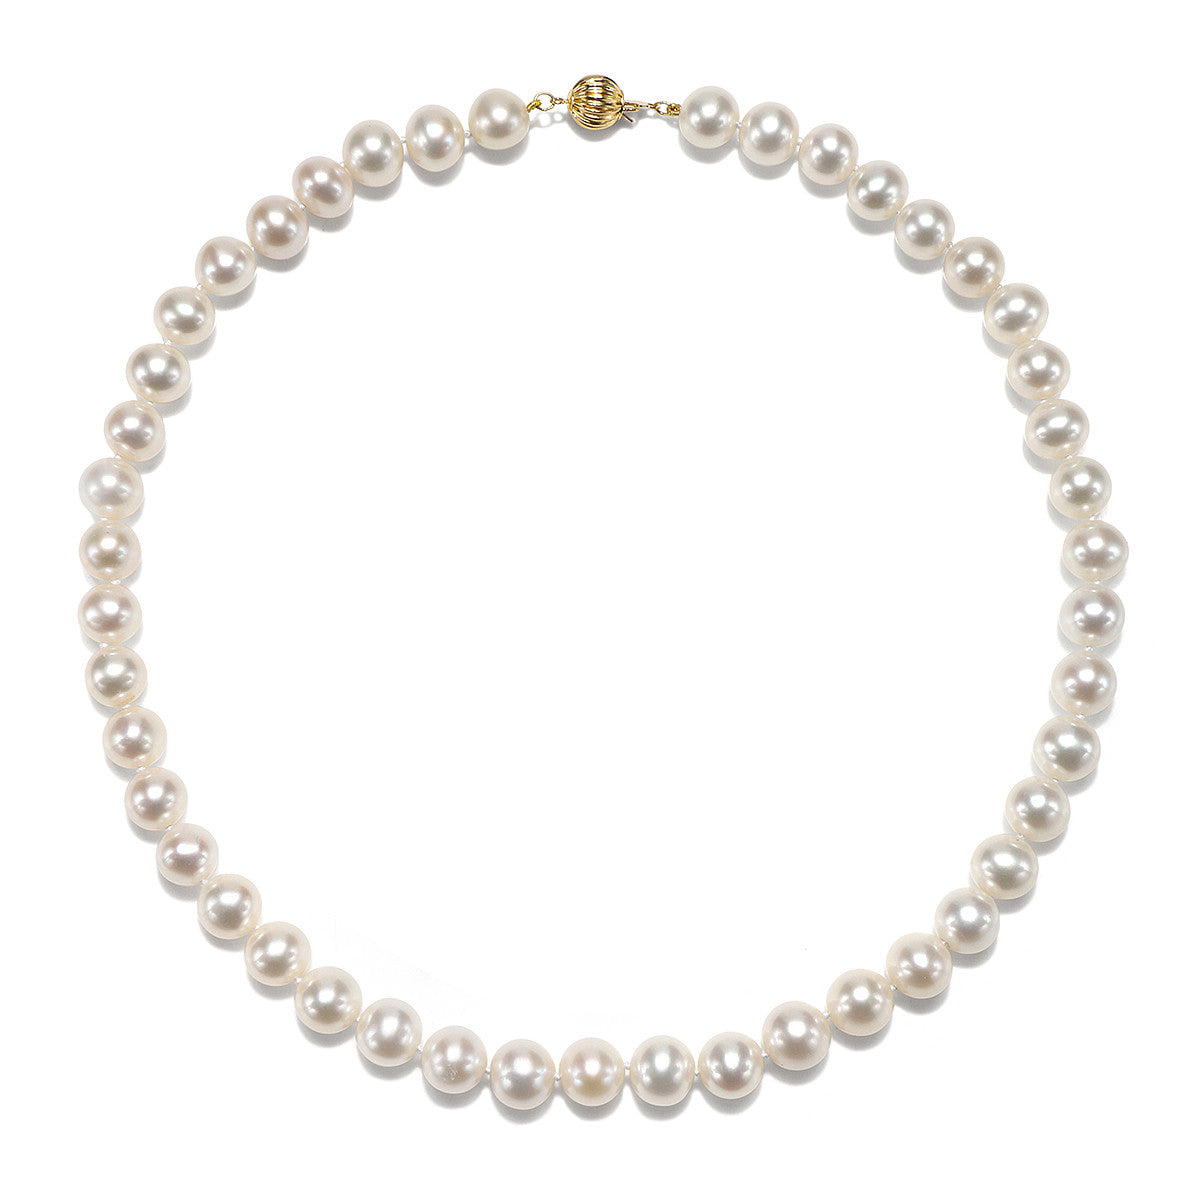 8.5 - 9.5mm Cultured White Freshwater Pearl Necklace, 18", AAA High Luster, 14K Yellow Gold - Isaac Westman - 2